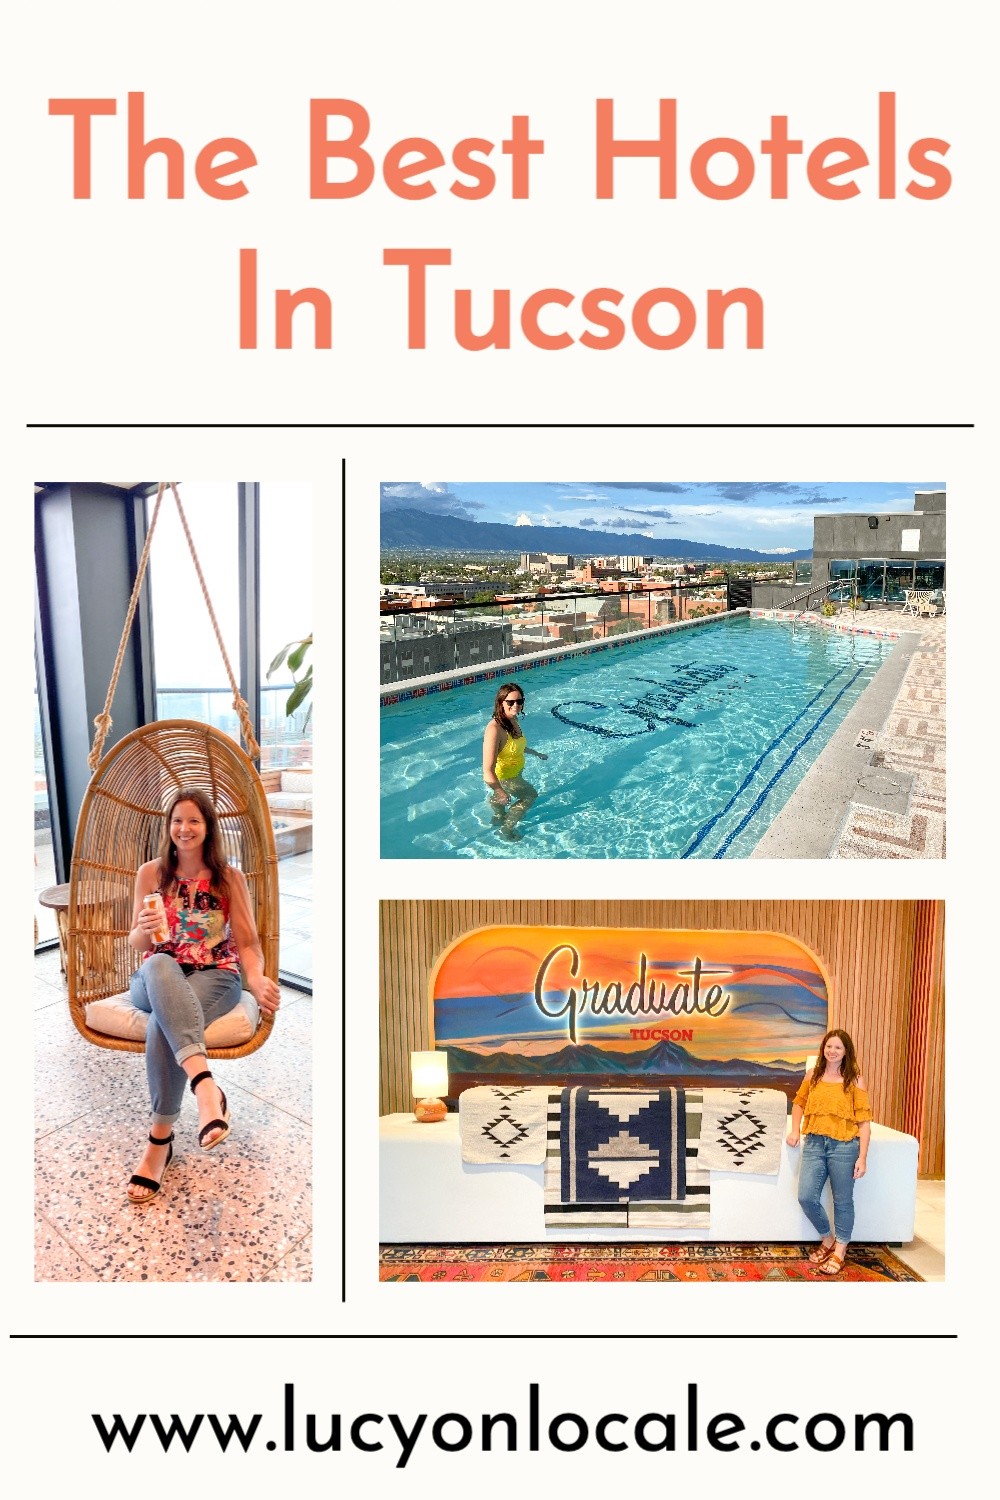 The best hotels in Tucson